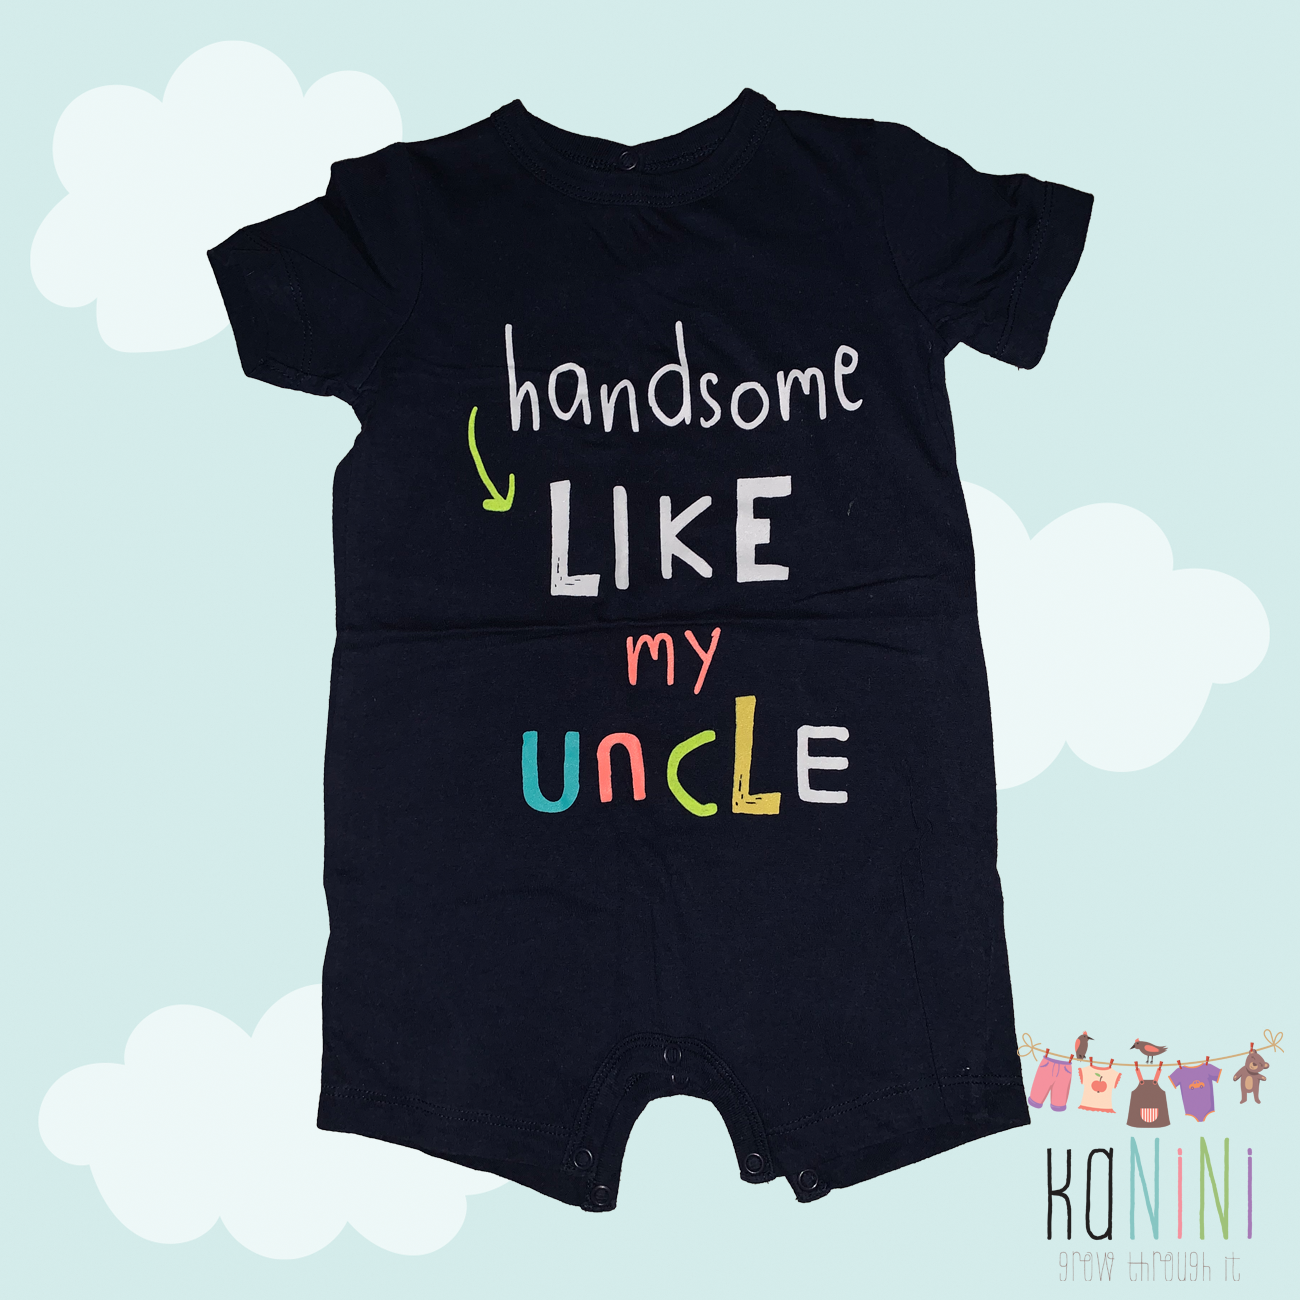 Featured image for “Woolworths 6 - 12 Months Boys Handsome Romper”